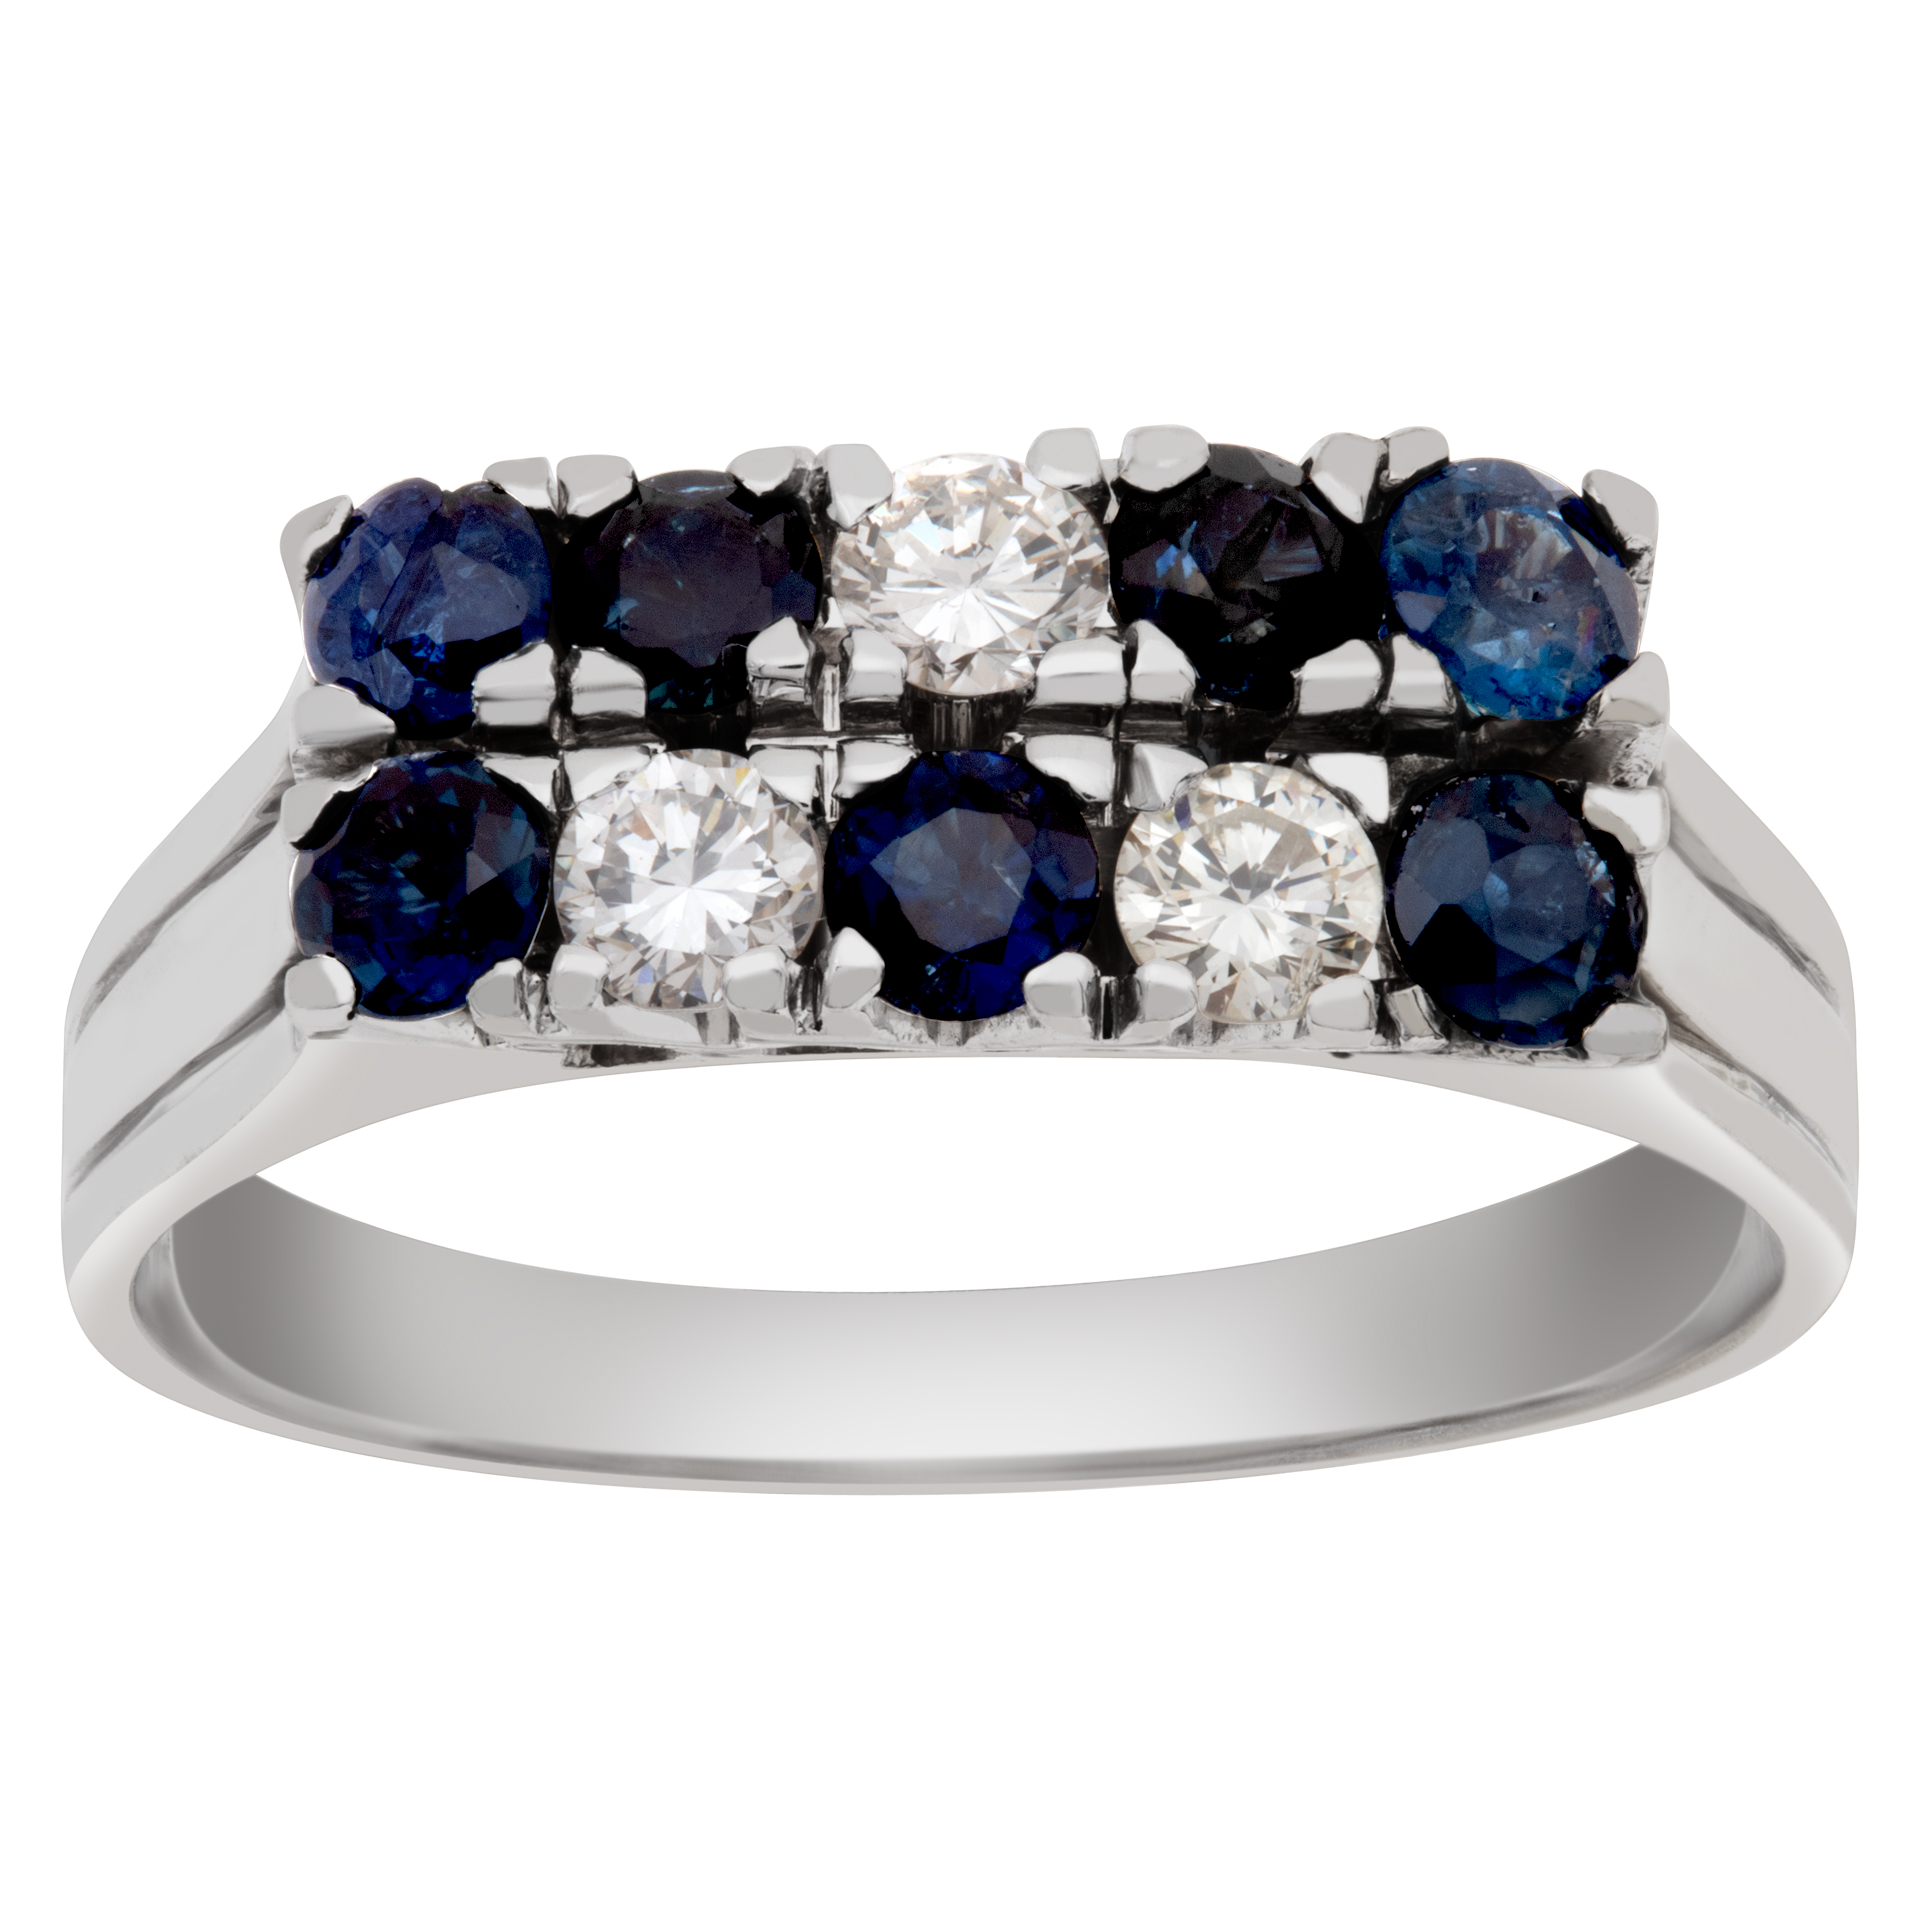 Sapphire and diamond station ring